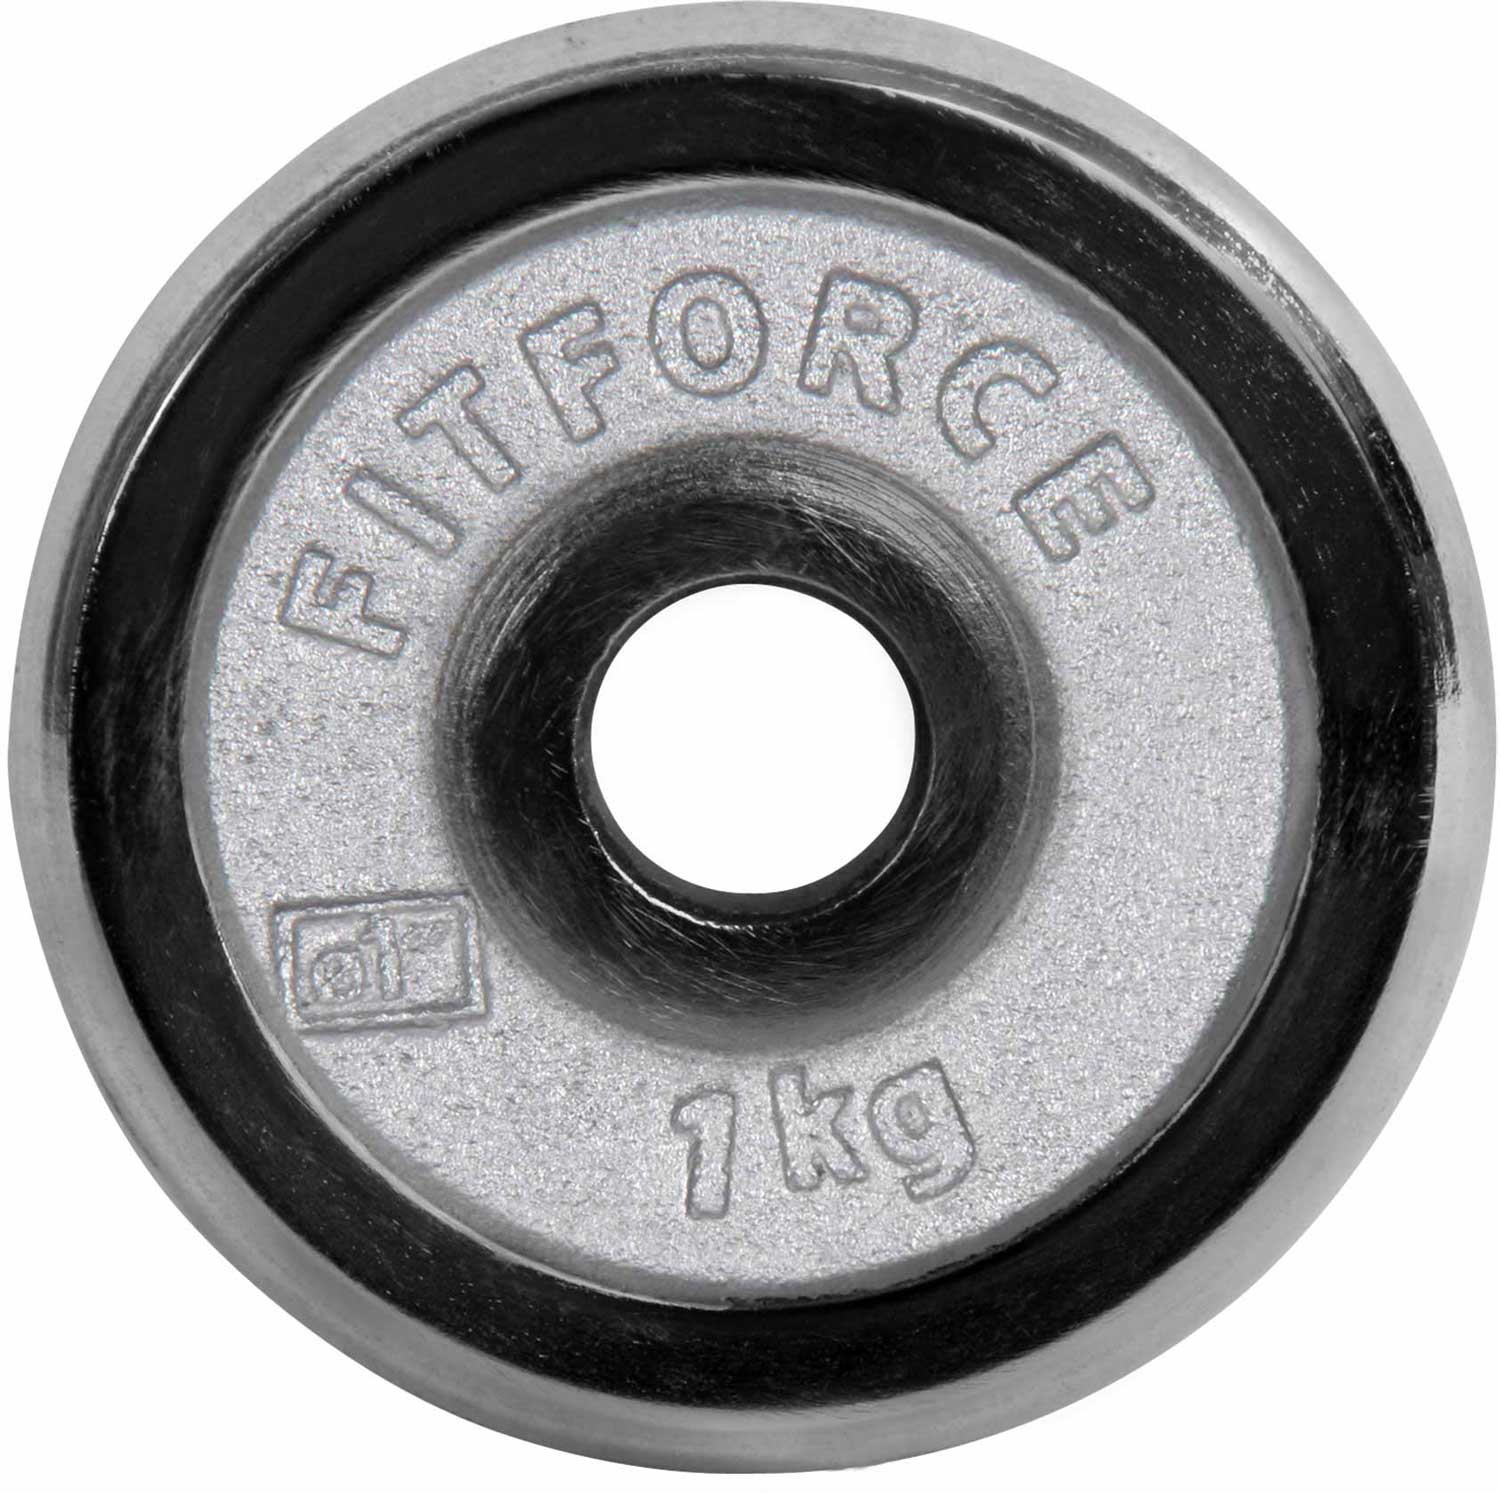 WEIGHT DISC PLATE 1KG CHROME - Weight Disc Plate